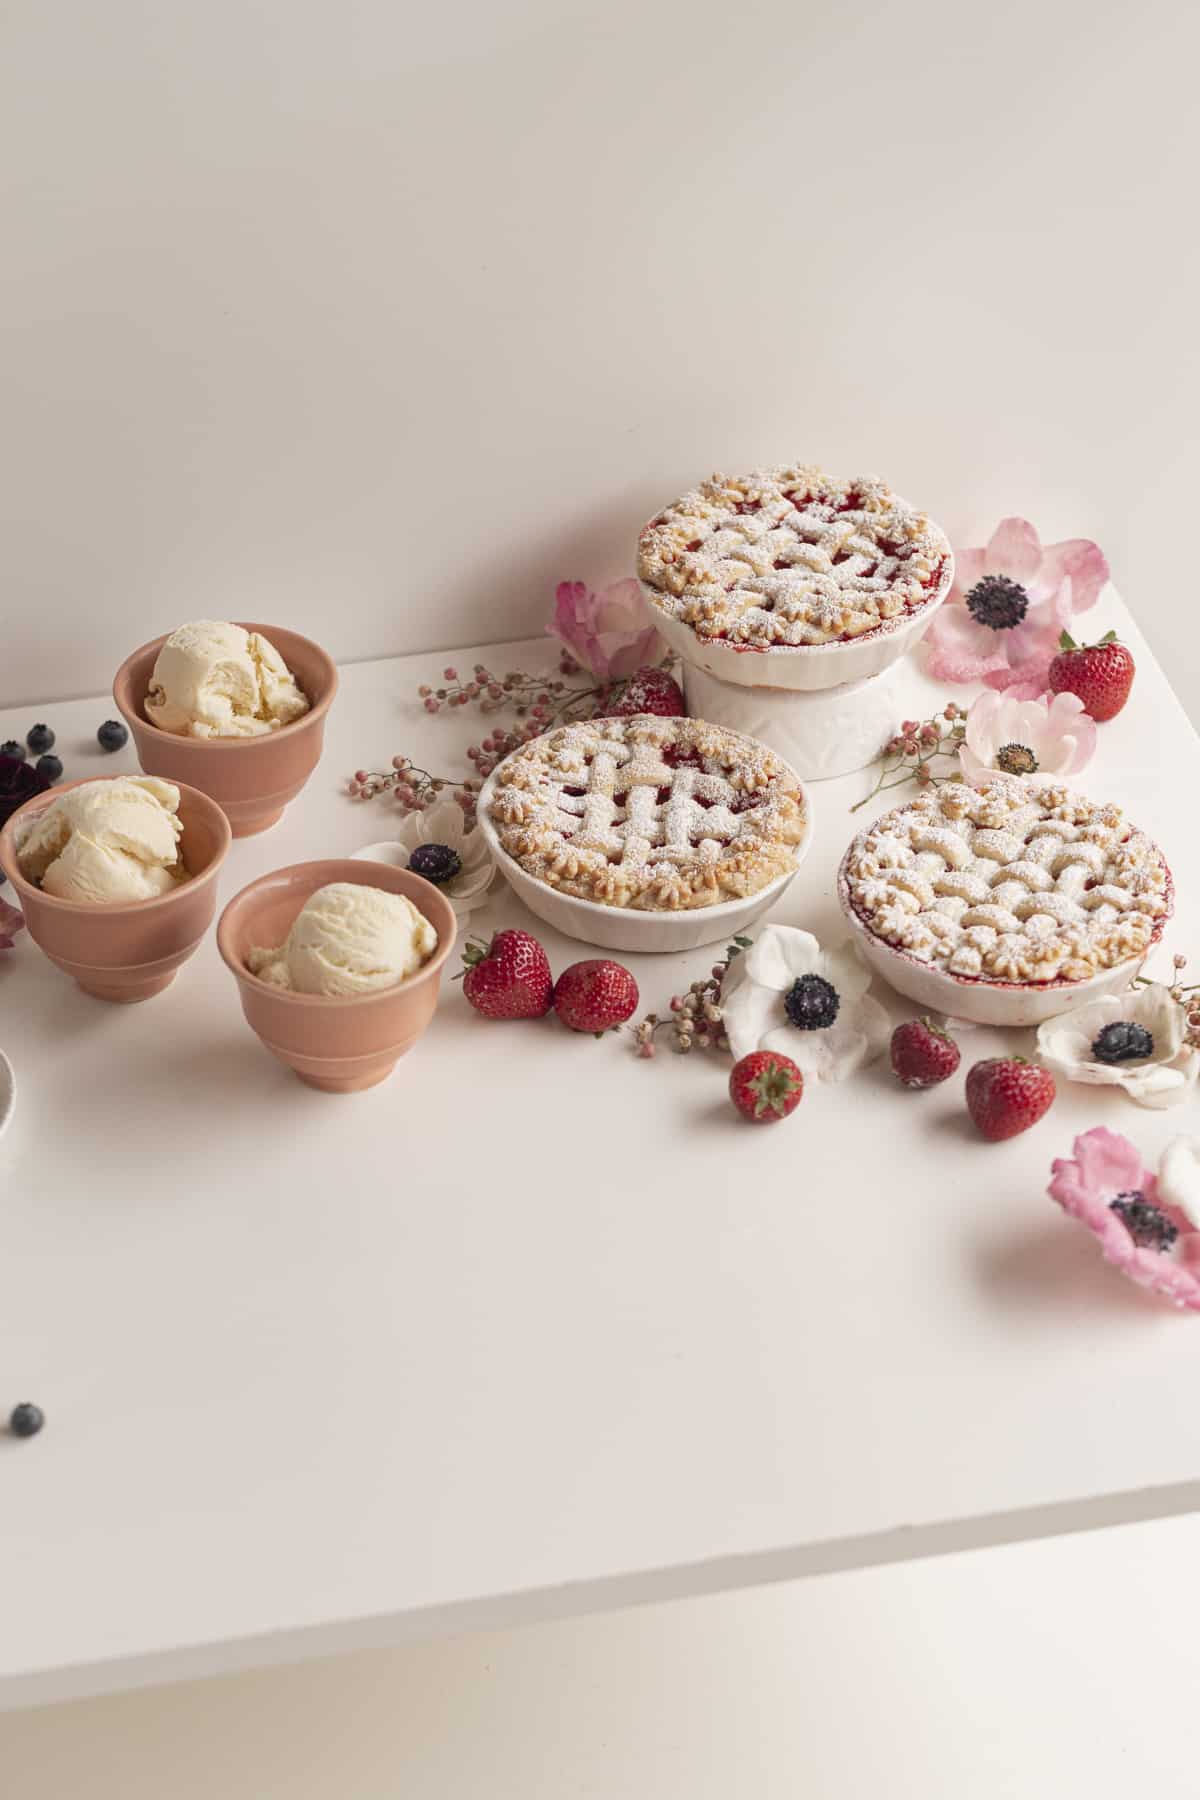 pies and ice cream in ceramics on a table with flowers